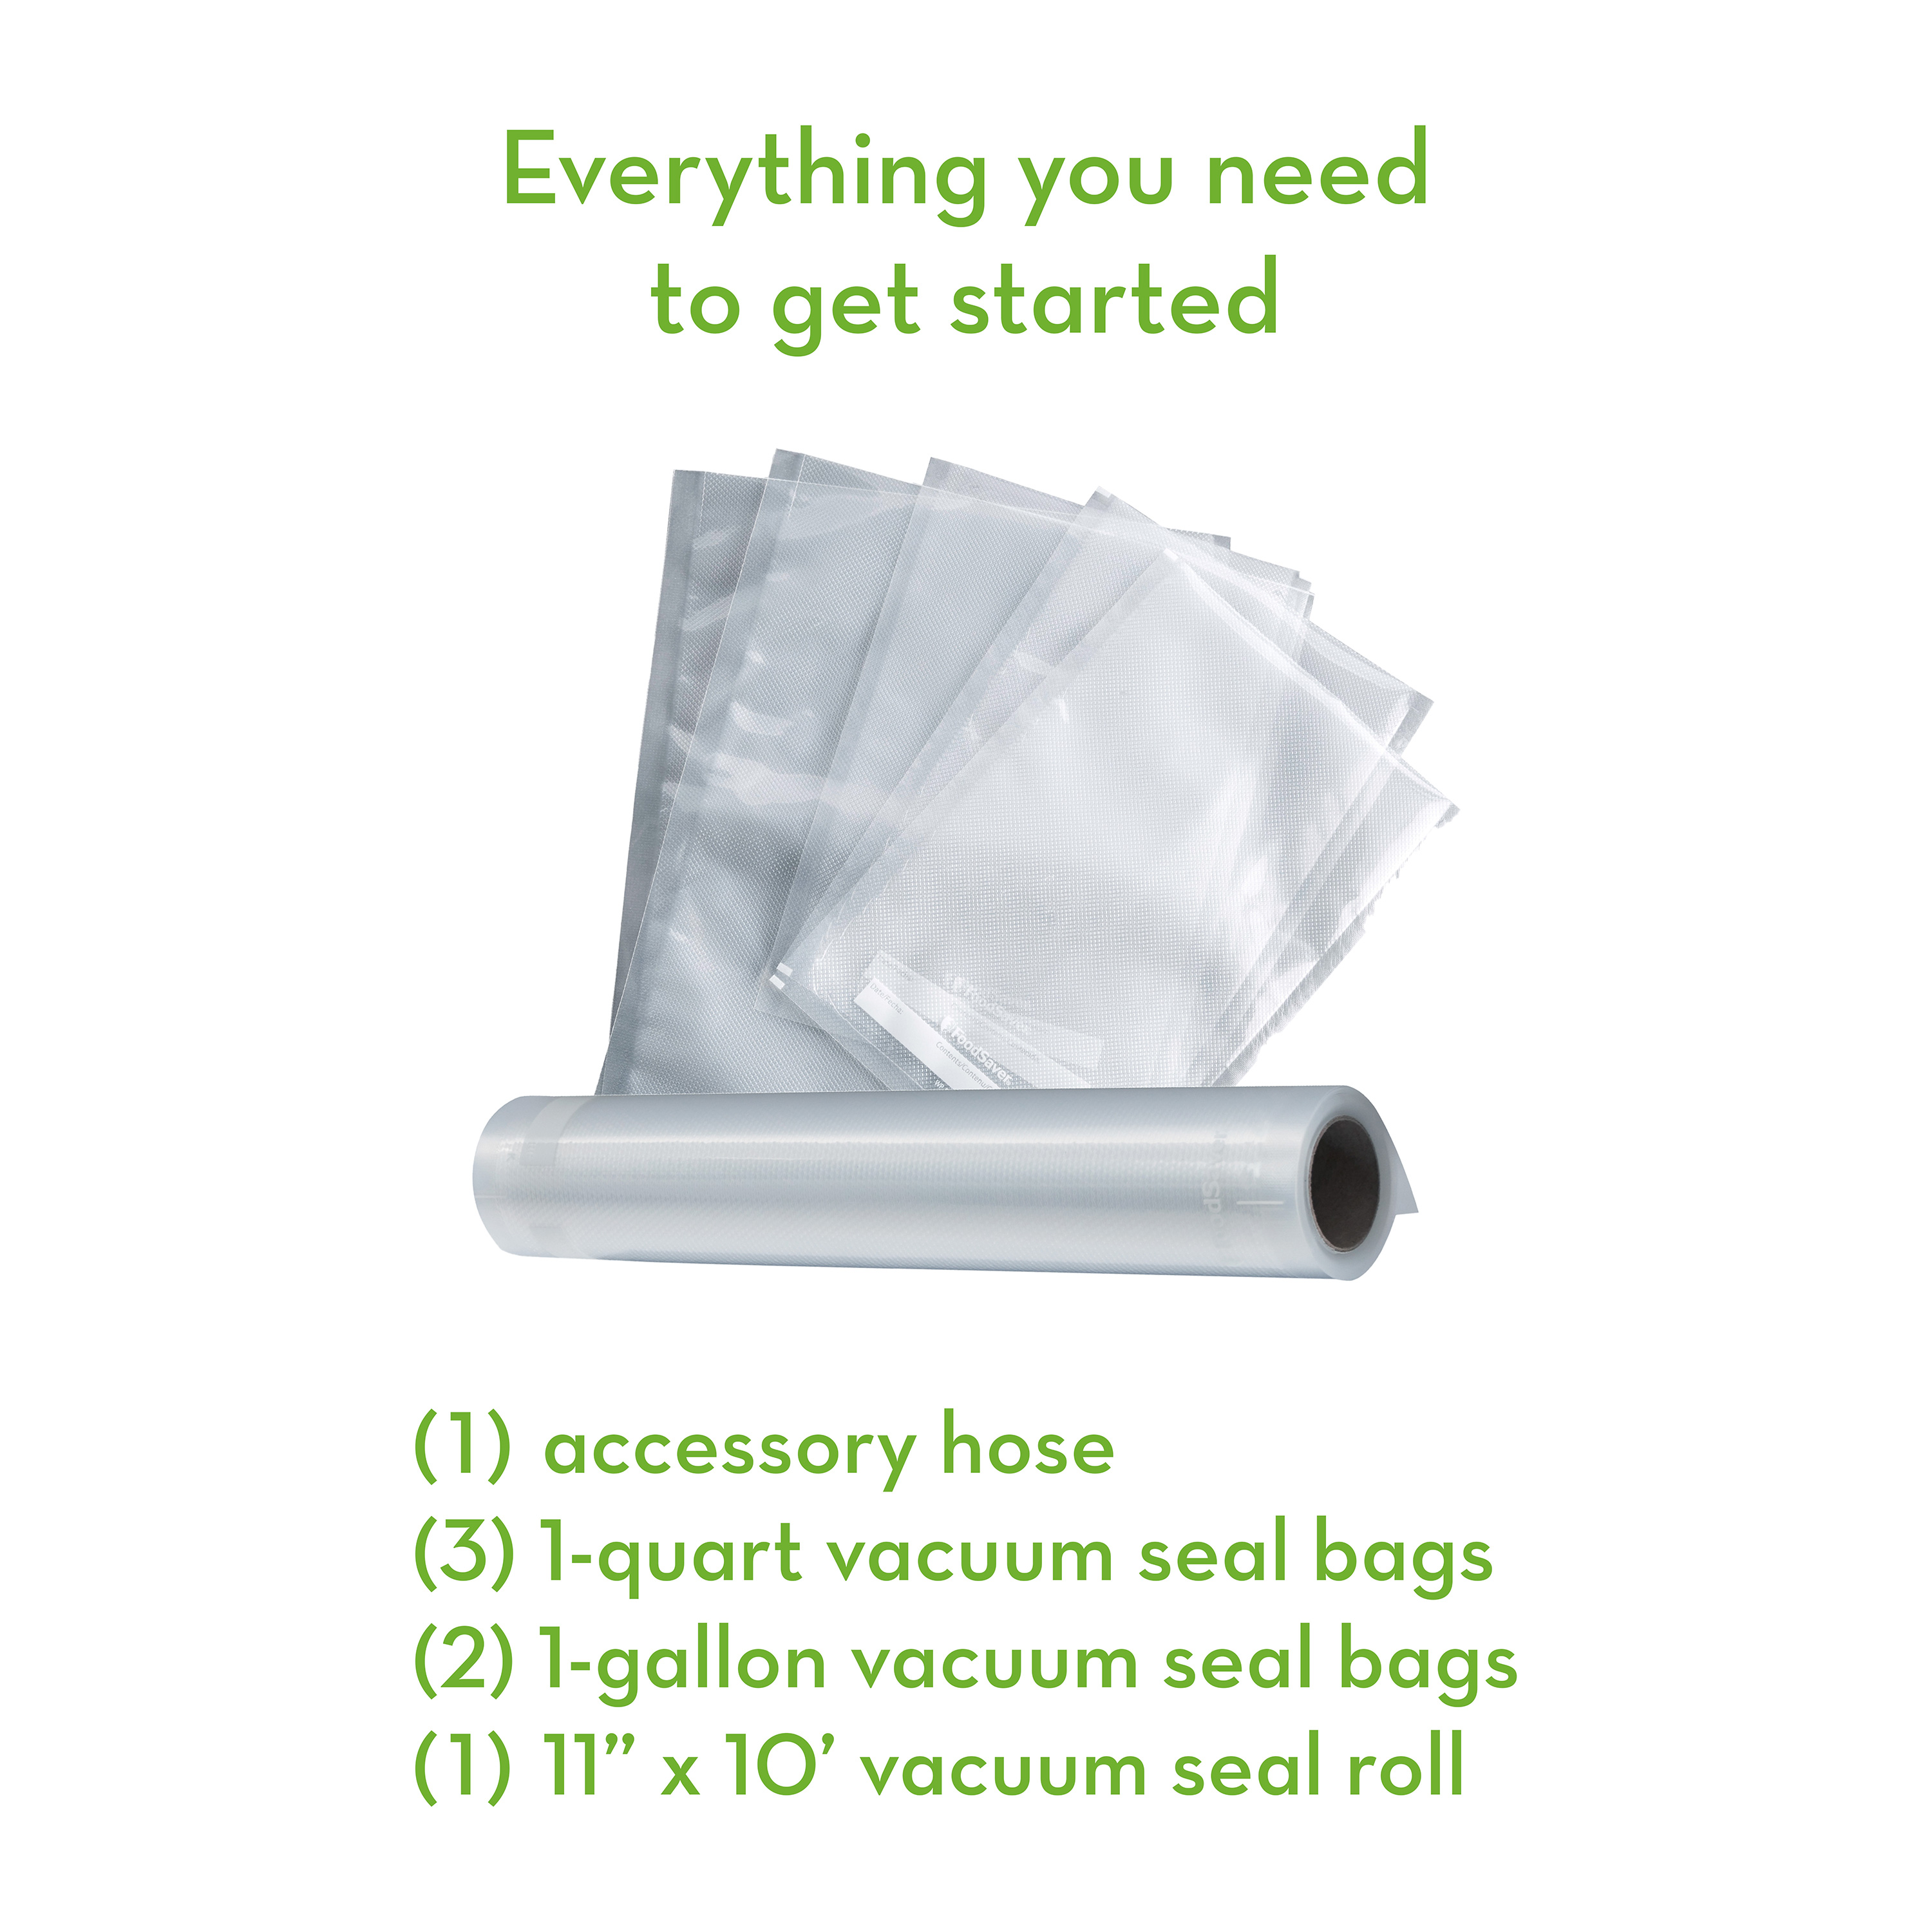 FoodSaver FM2000 Manual Vacuum Sealing System Value Bundle with Bags and Hose - image 5 of 12